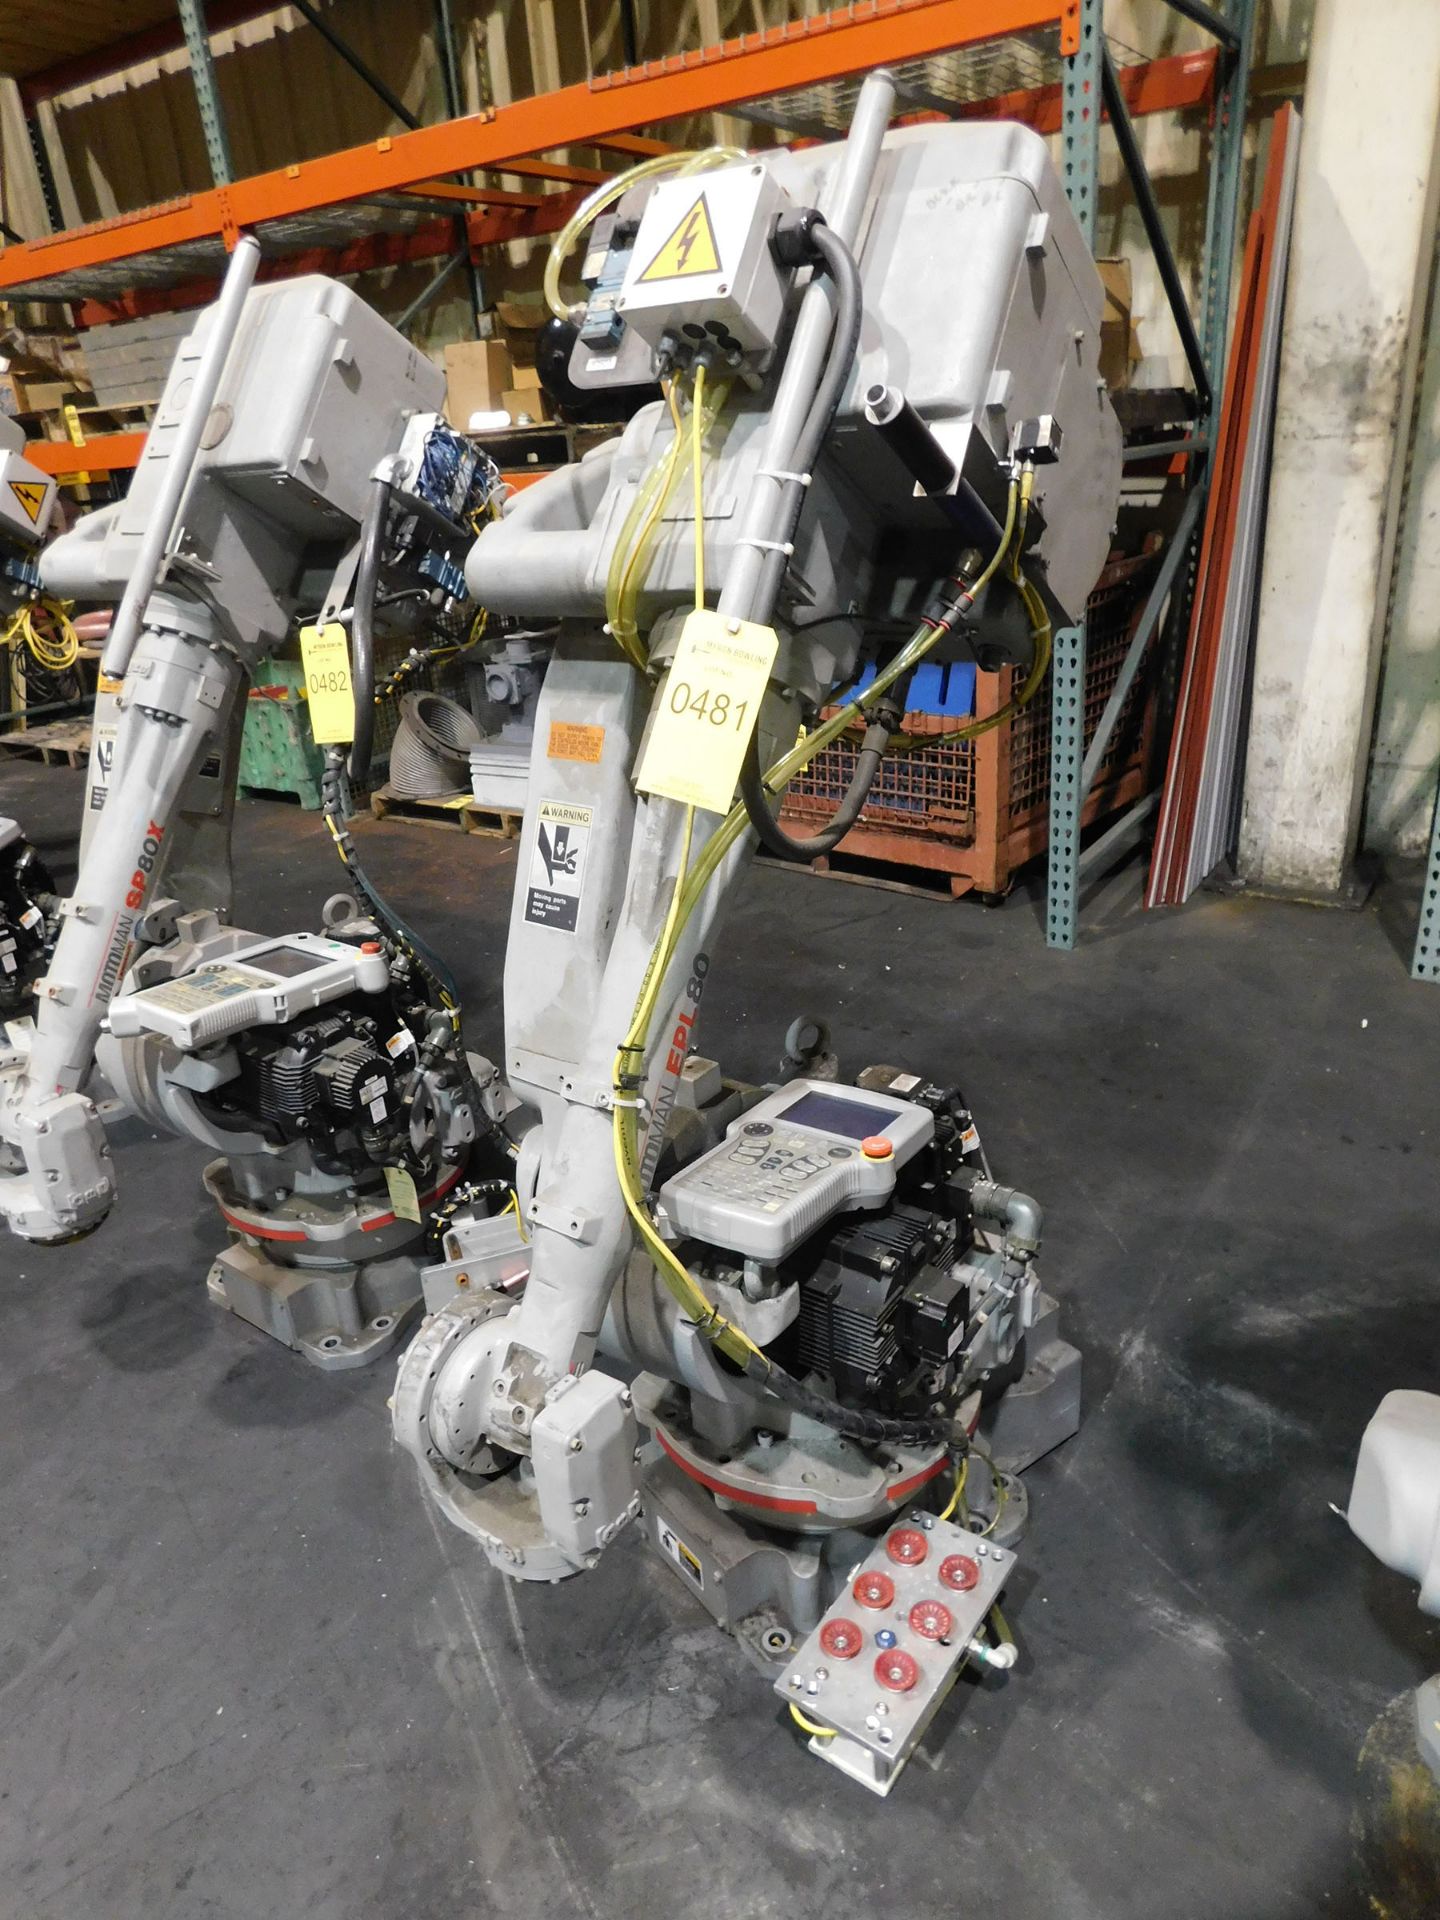 MOTOMAN EPL80 ROBOT; S/N S46A99-1-4, 80-KG PAYLOAD, DATE 2005.07